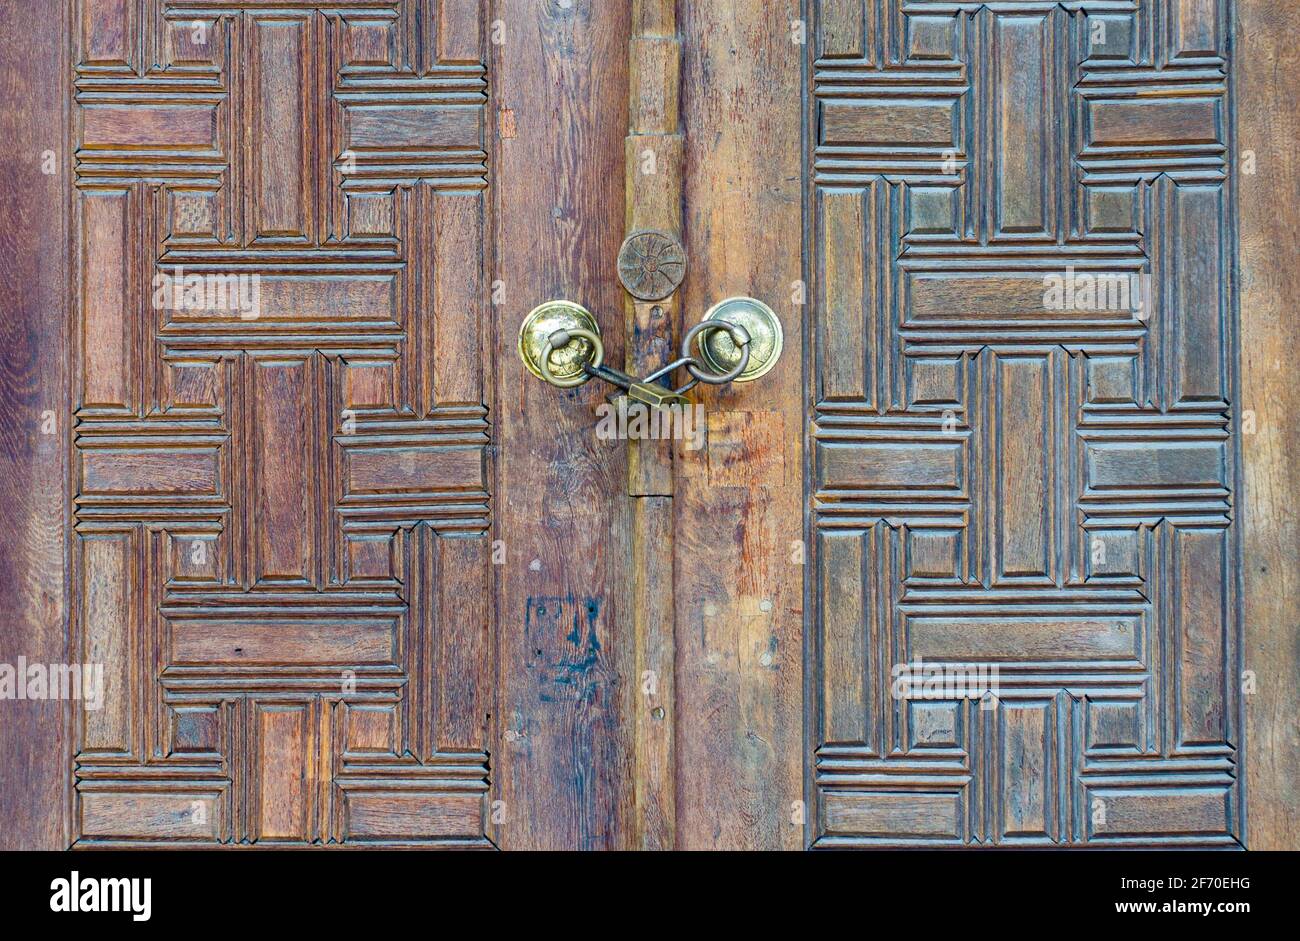 Old wooden door with beautiful patterns Stock Photo